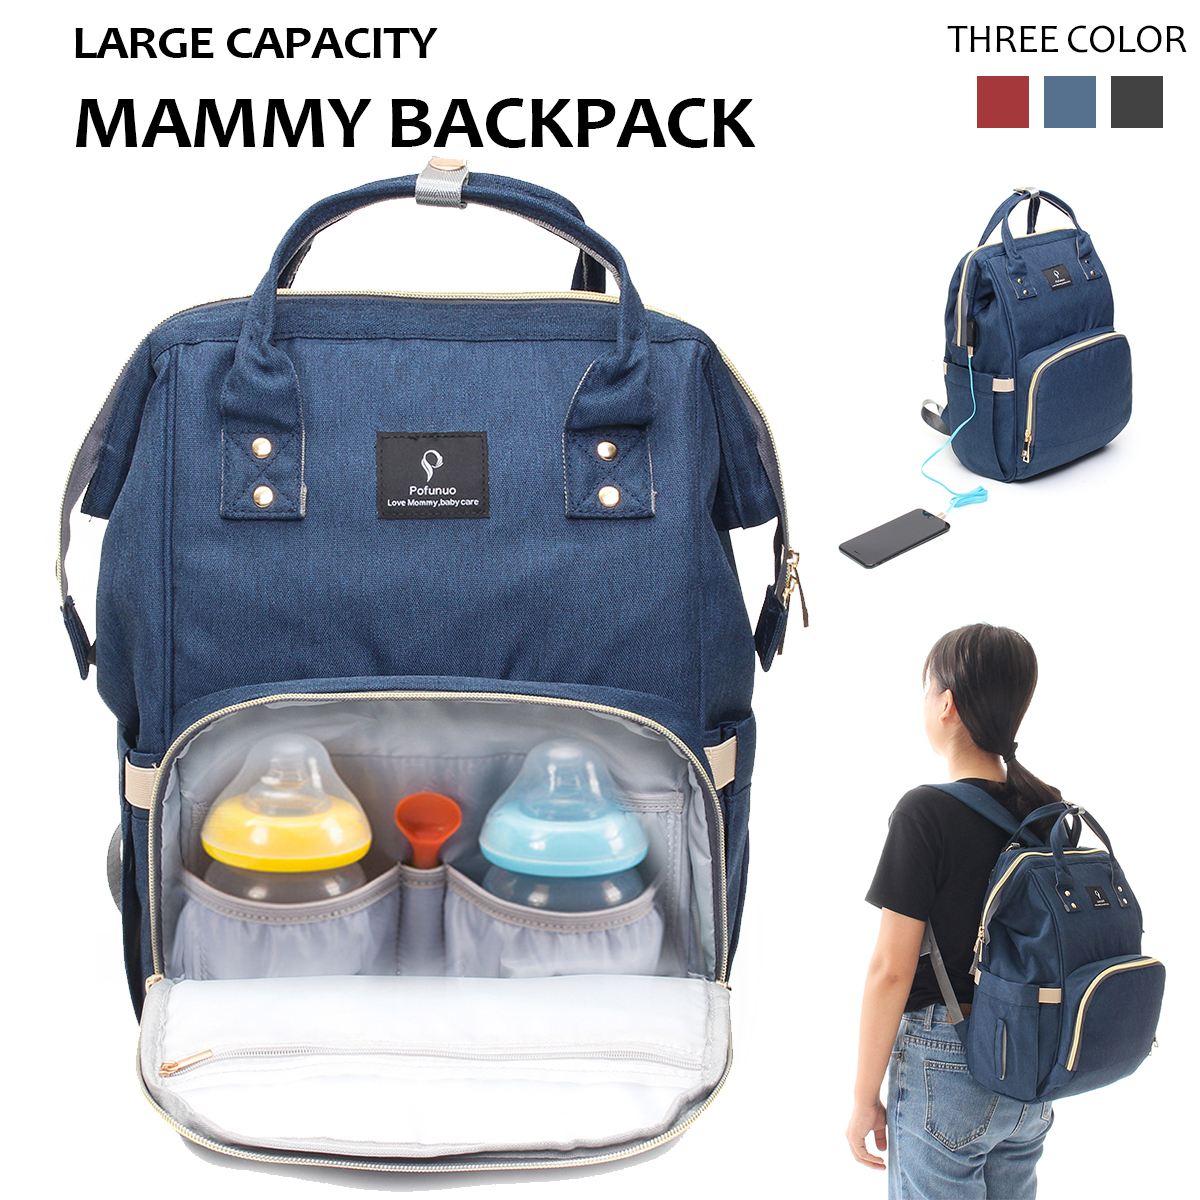 35L-Large-Mummy-Nappy-Baby-Diaper-Bags-Travel-Changing-Nursing-Nappies-Backpack-1298439